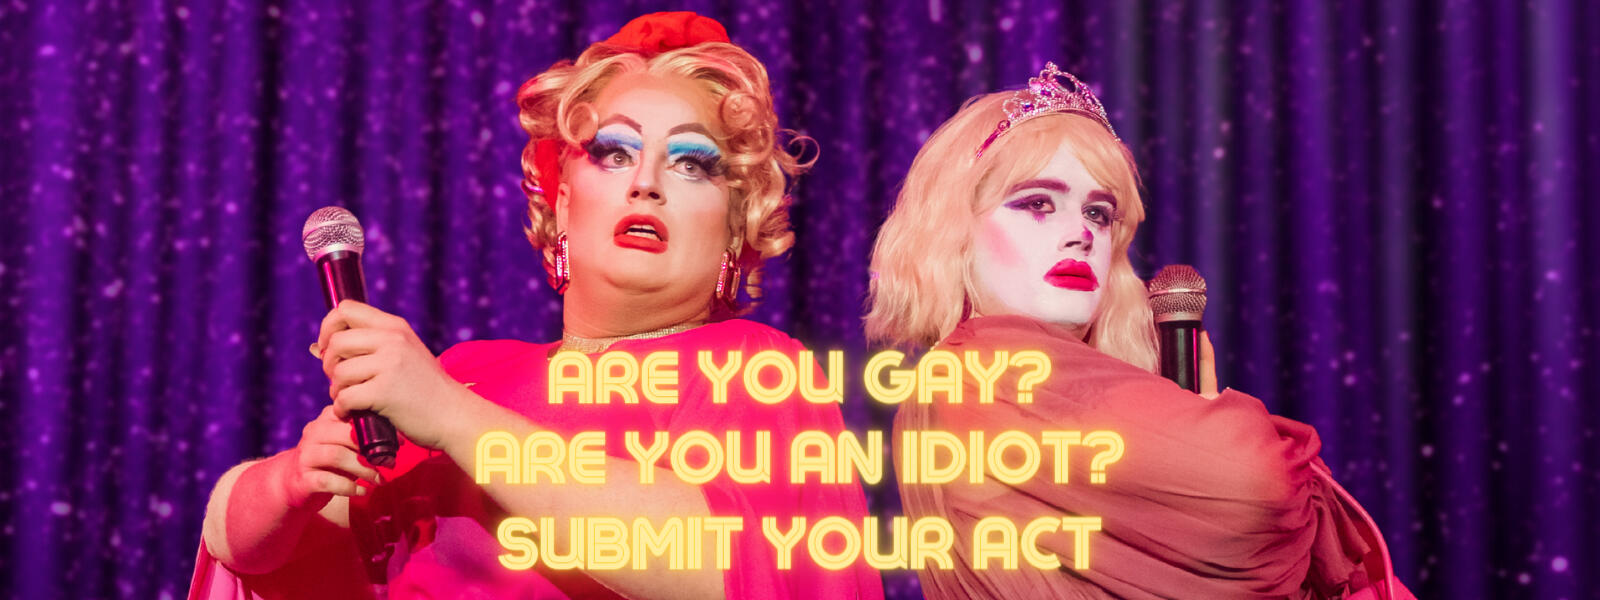 Are you gay? Are you an idiot? Submit your act